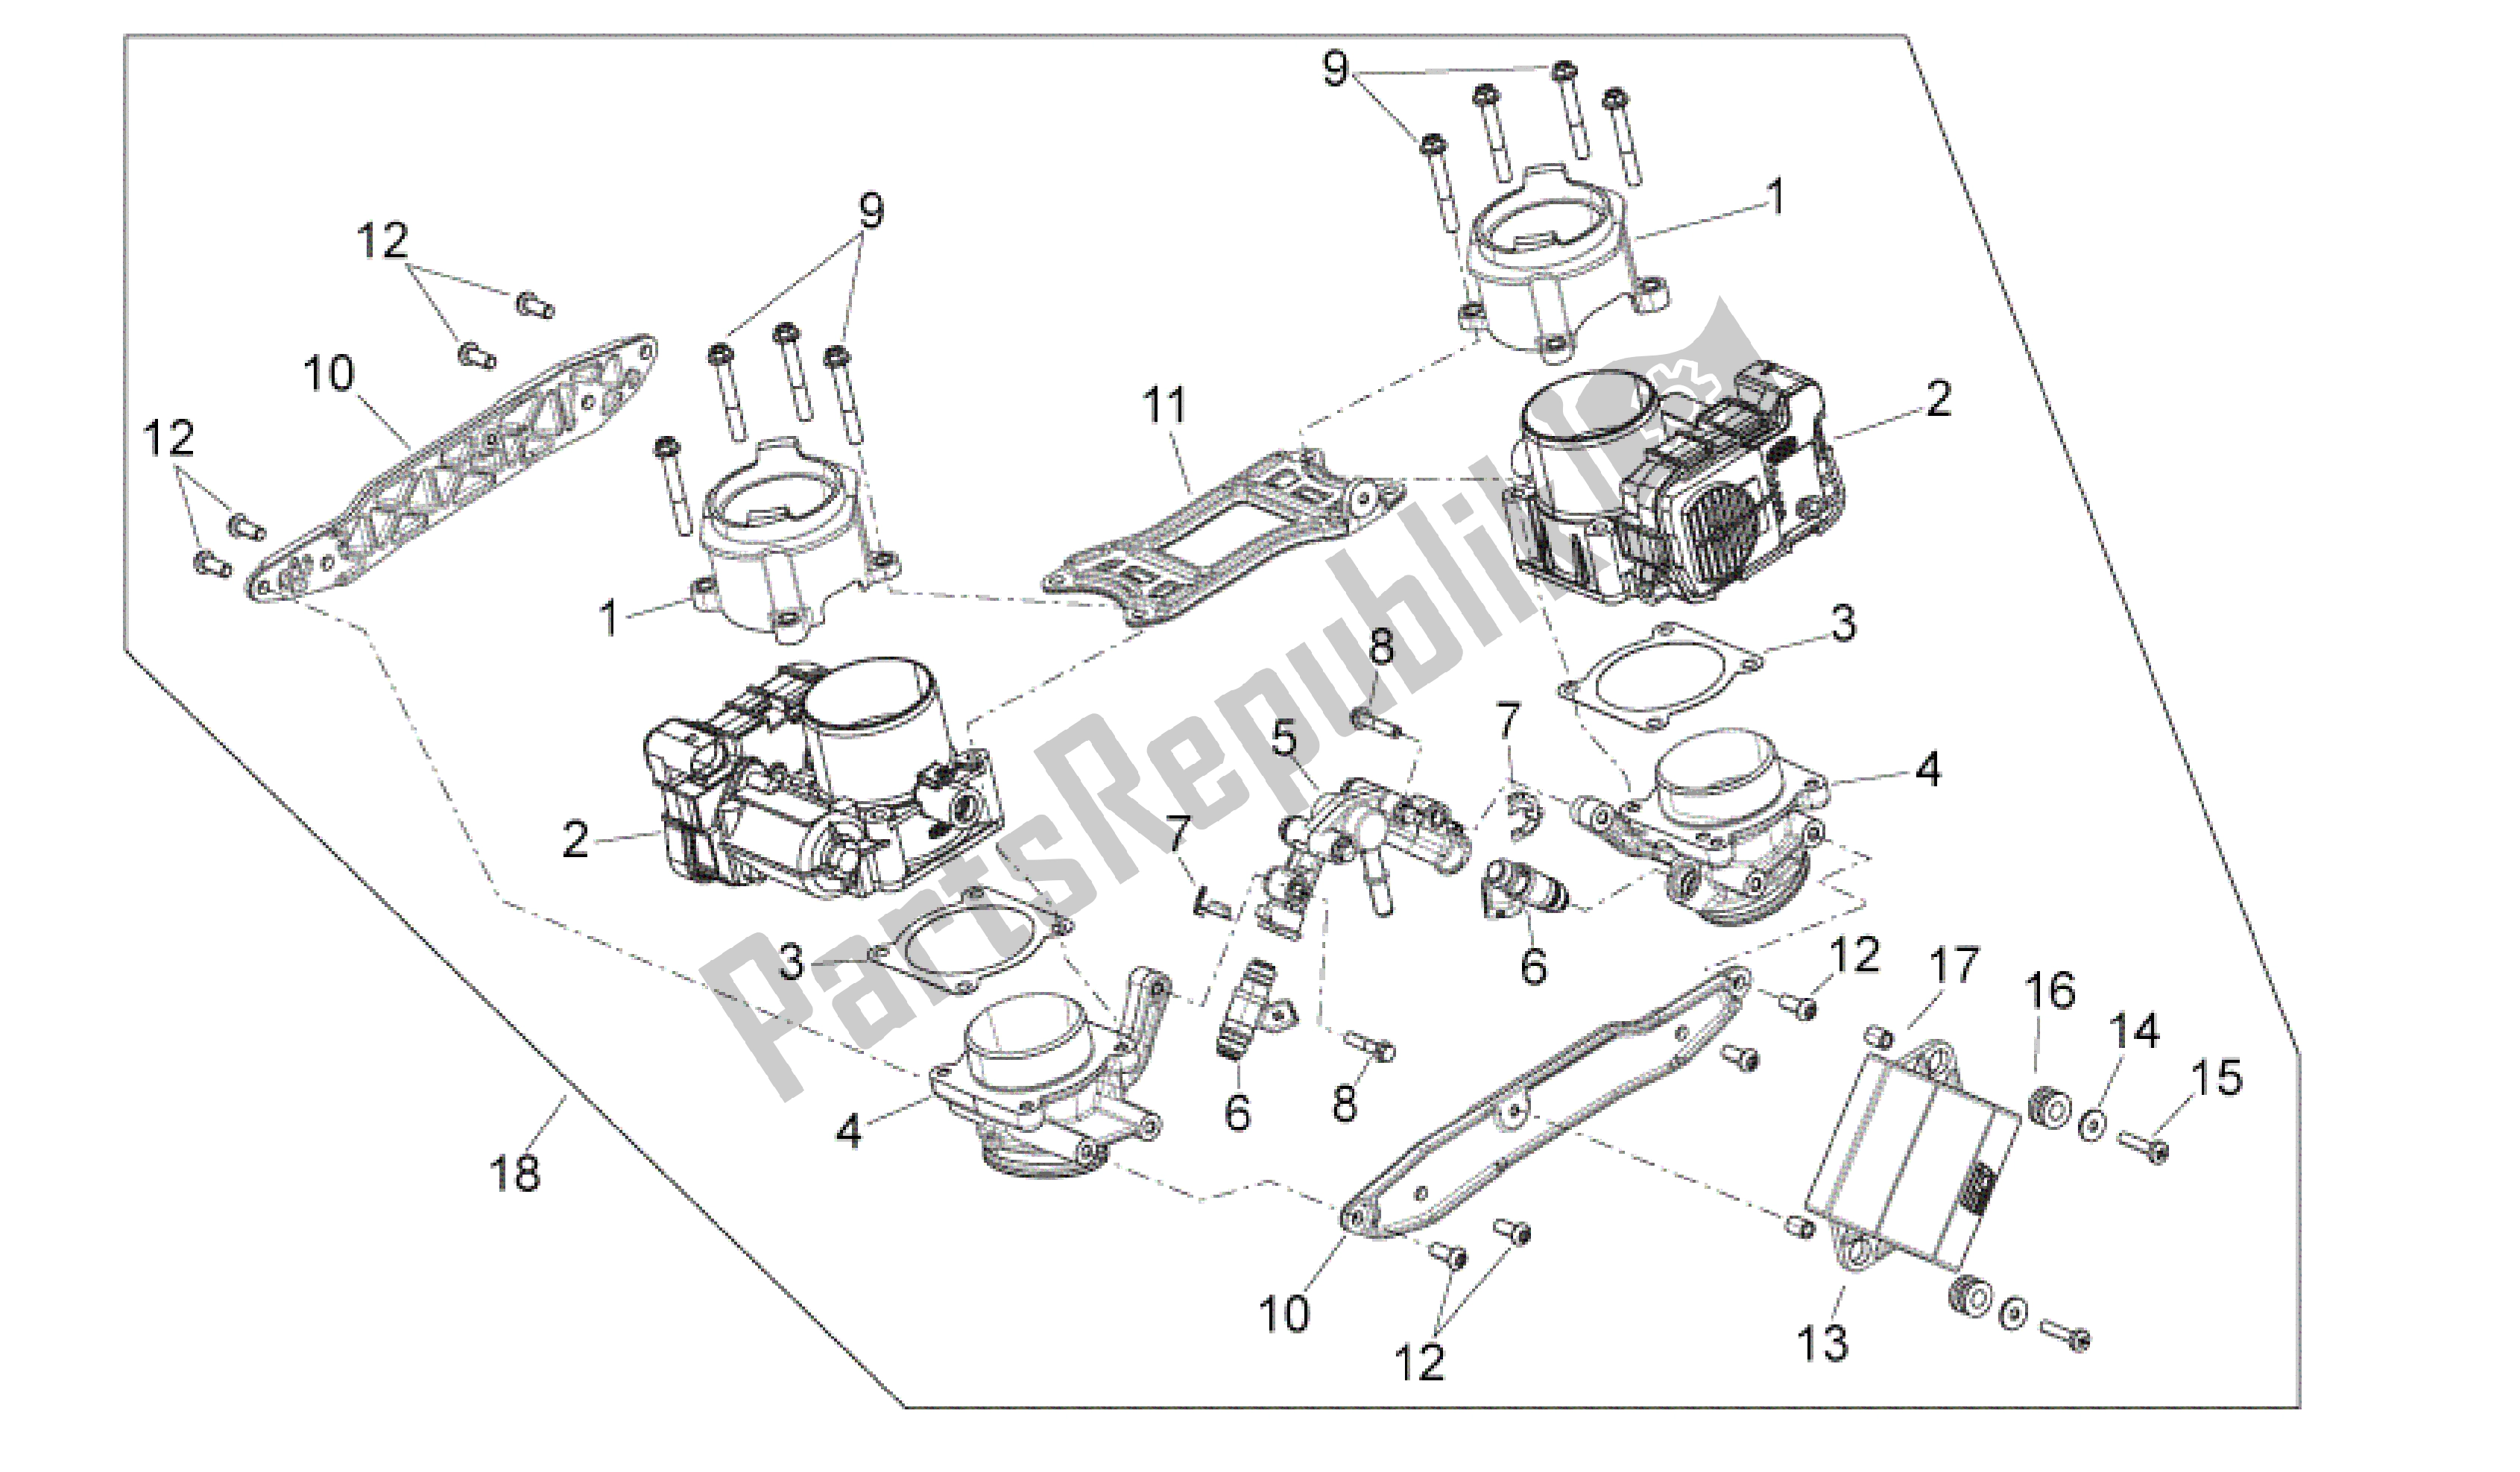 All parts for the Throttle Body of the Aprilia Shiver 750 2007 - 2009